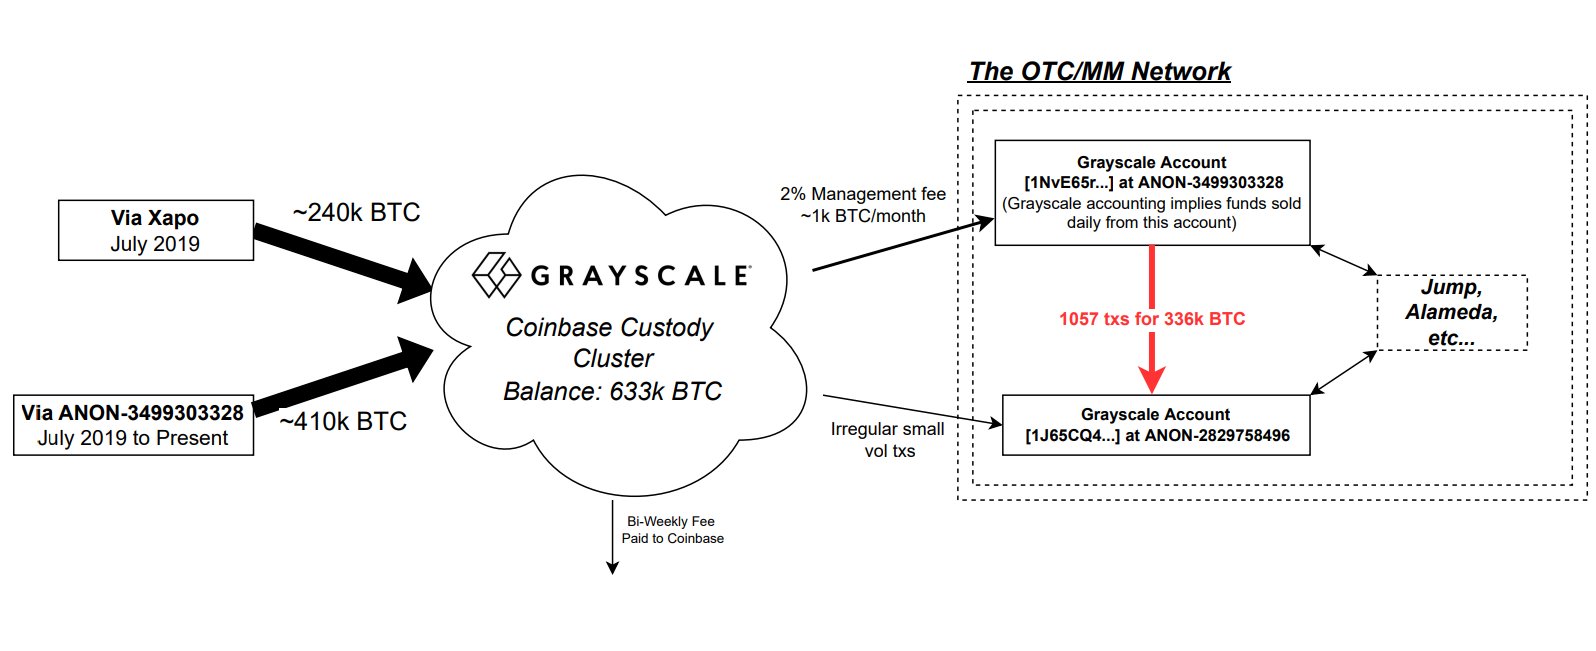 Onchain Analysis verifies the number of BTC held by Grayscale's Bitcoin Trust